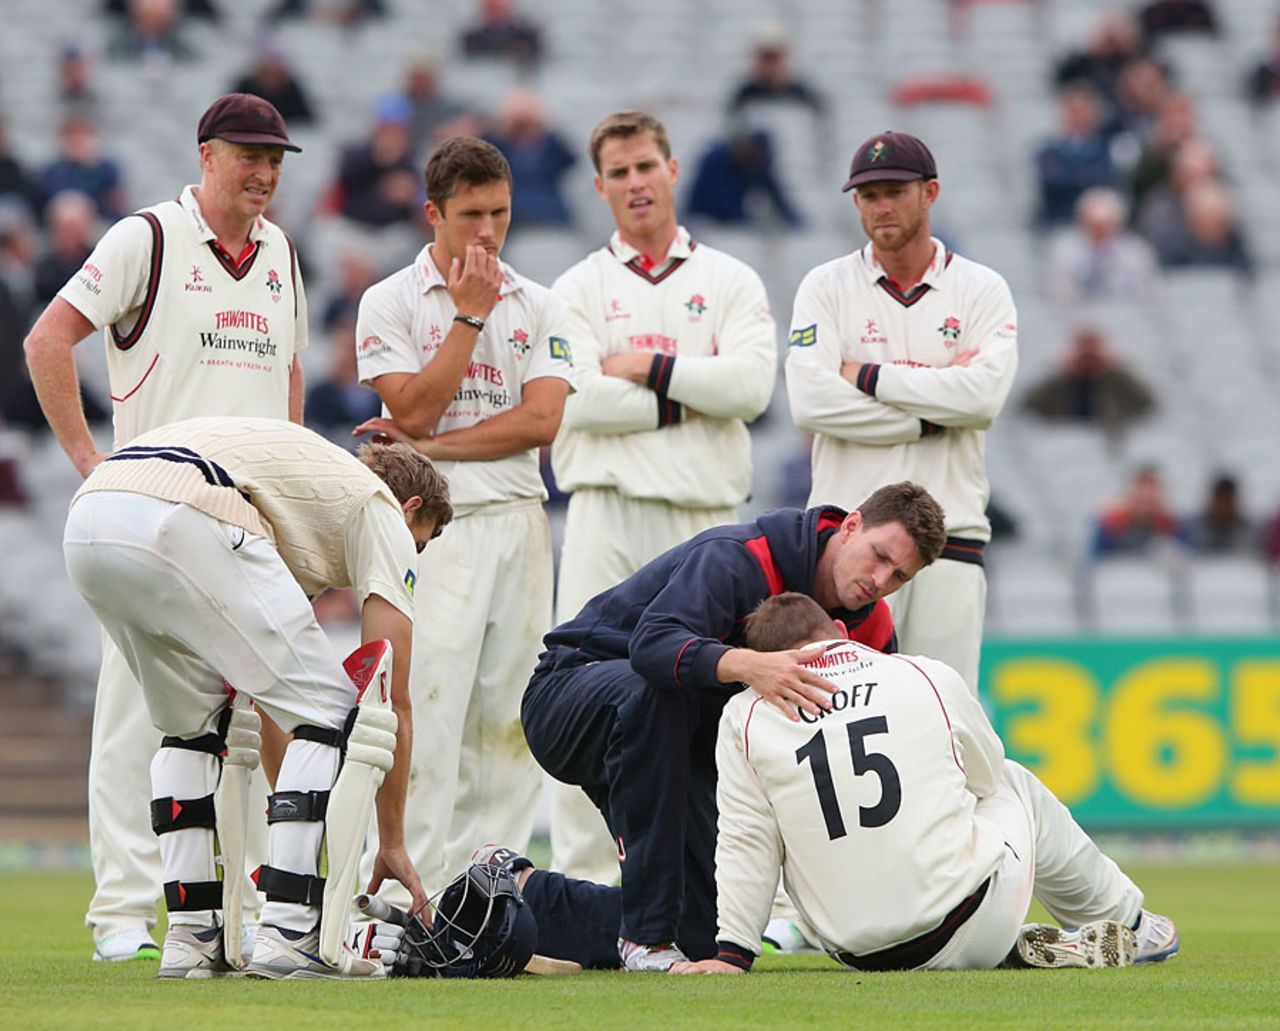 Steven Croft took a whack in the neck at short leg, Lancashire v Middlesex, County Championship, Division One, September 25, 2014